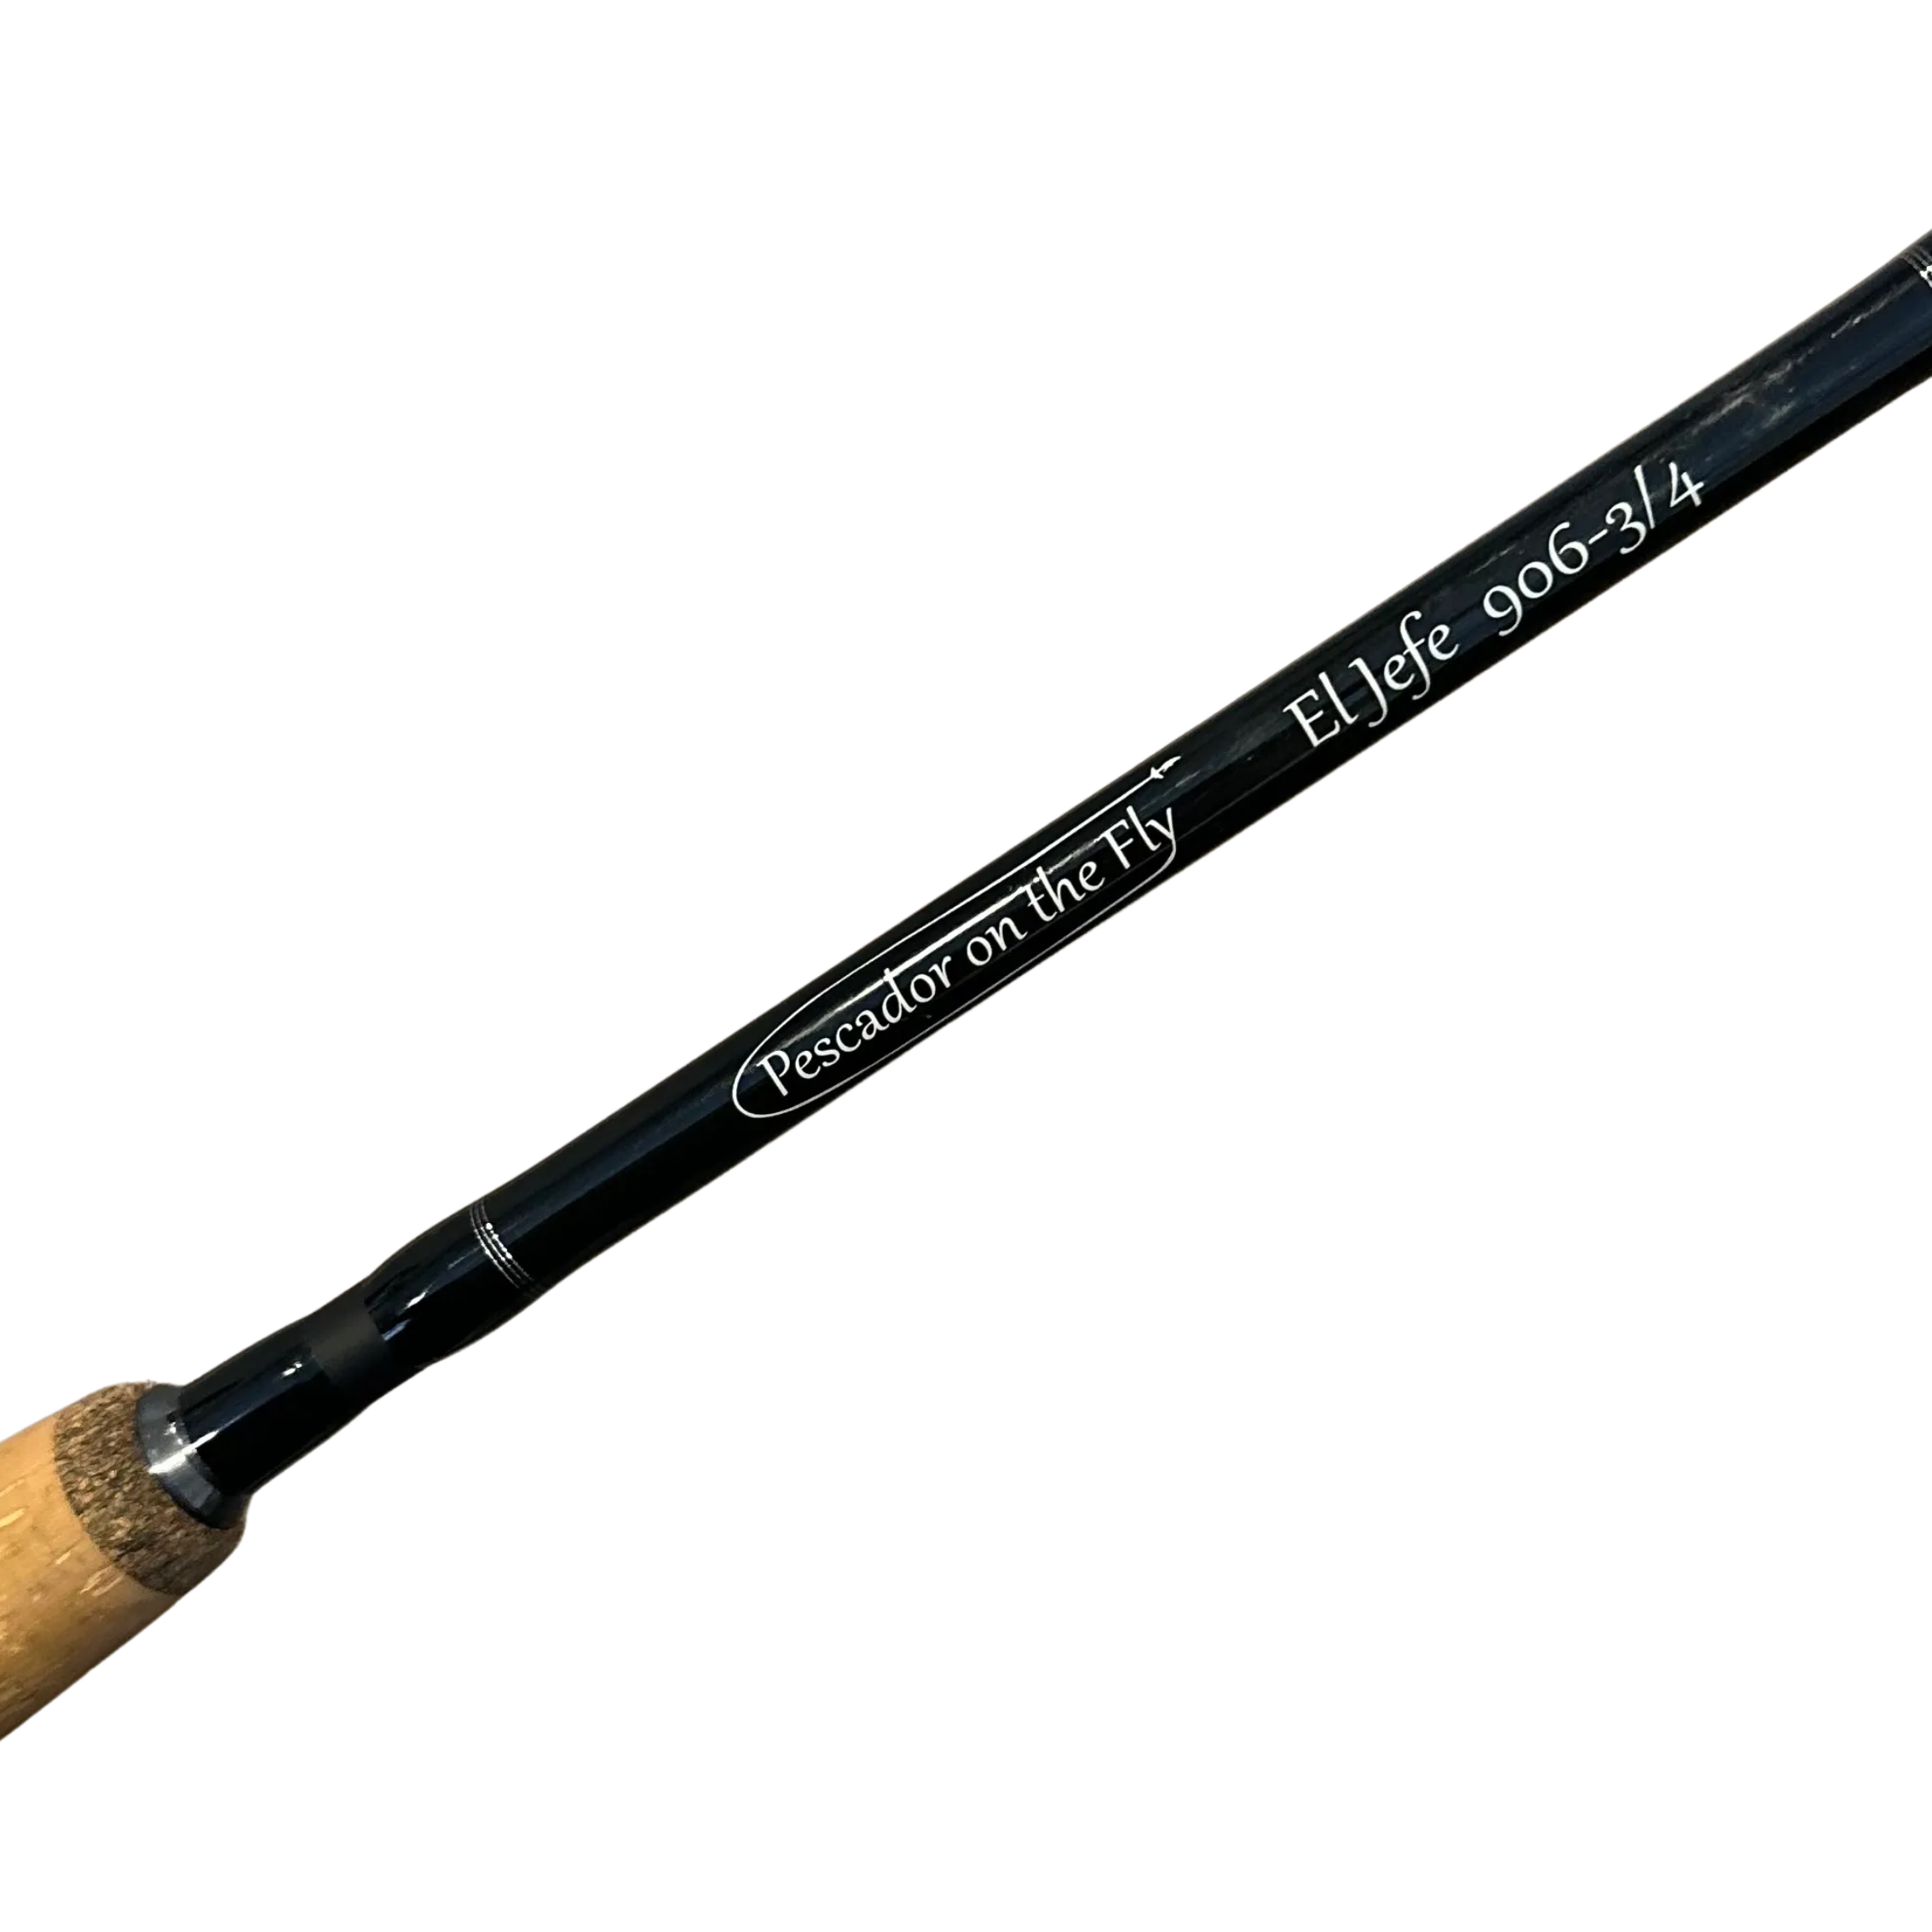 EL JEFE PACKABLE FLY FISHING RODS | FRESHWATER & SALTWATER | 0-10 WEIGHT FLY RODS